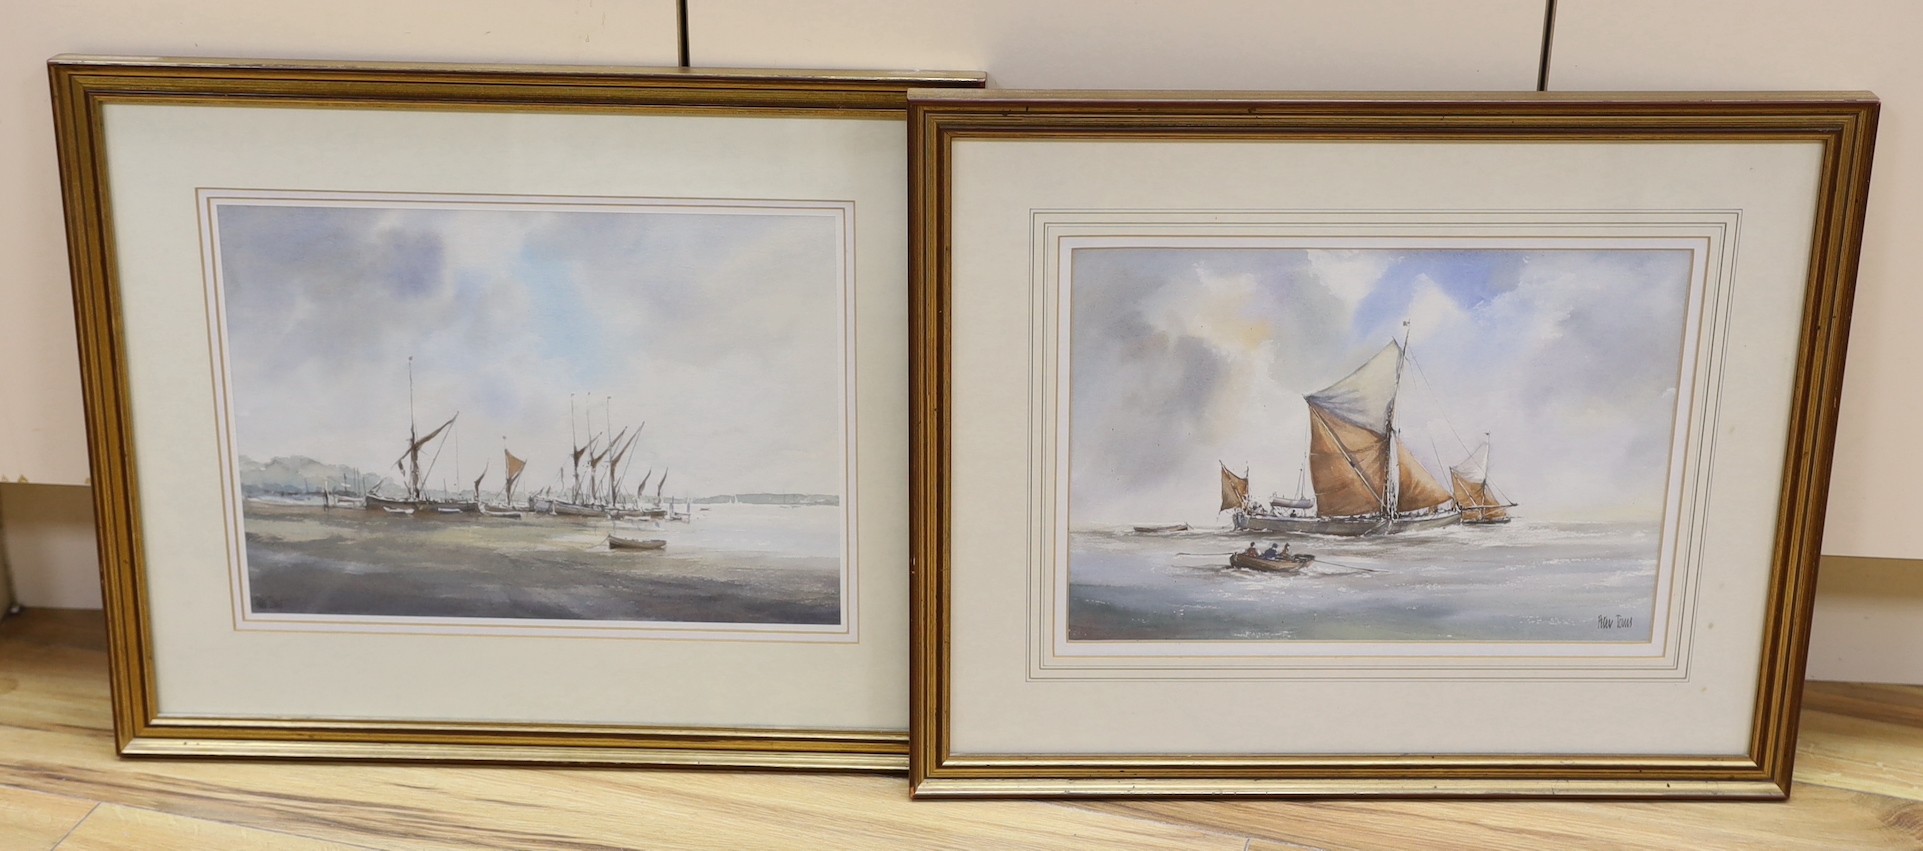 Peter Toms (b.1940), two watercolours, 'The Foreshore Pin Mill' and 'Passing By', signed, 25 x 36cm